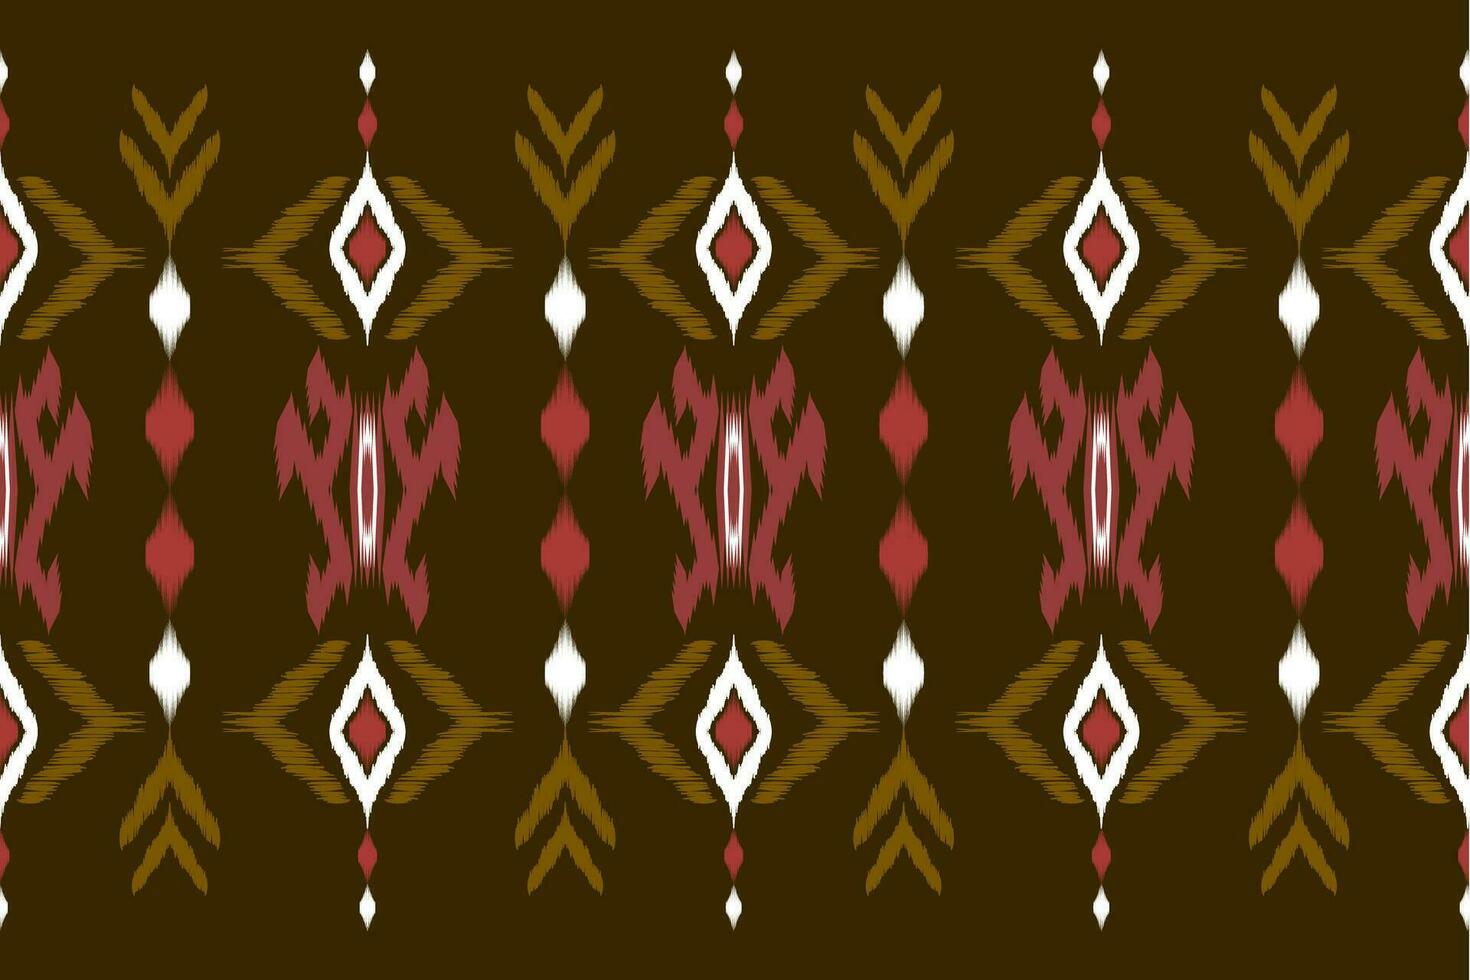 ikat Ethnic pattern design for background,carpet,wallpaper,clothing,wrapping,Batik,fabric,Vector illustration.embroidery style. vector